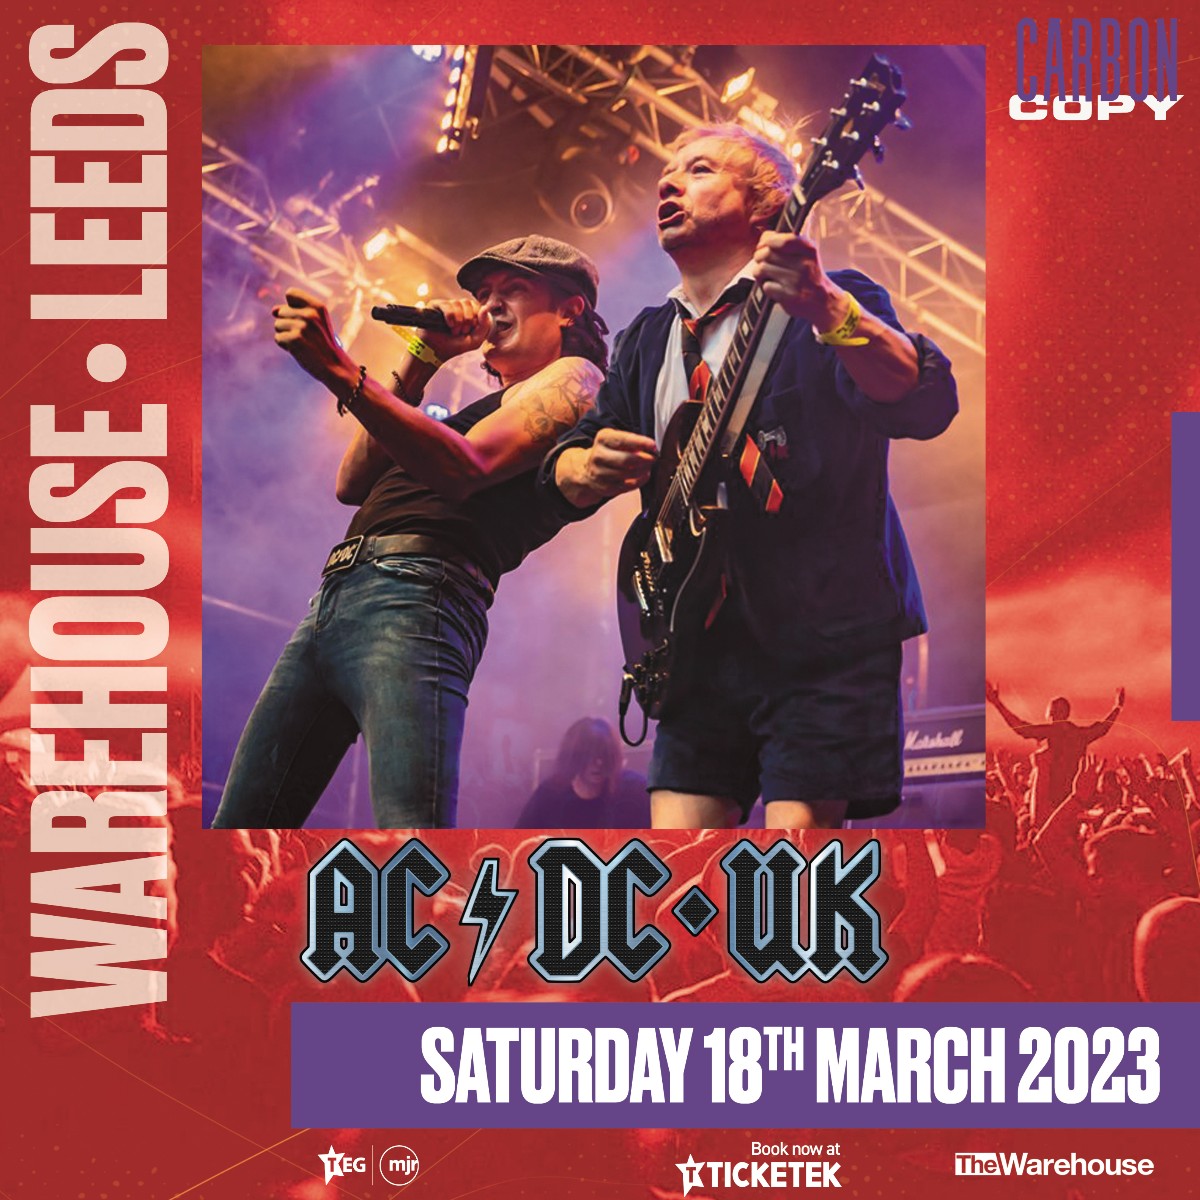 ON SALE NOW | AC/DC UK | 18/3/23 🎟Tickets: bit.ly/ACDCUK23 Don't miss the chance to see one of Europe's most popular and exciting tribute 🎸